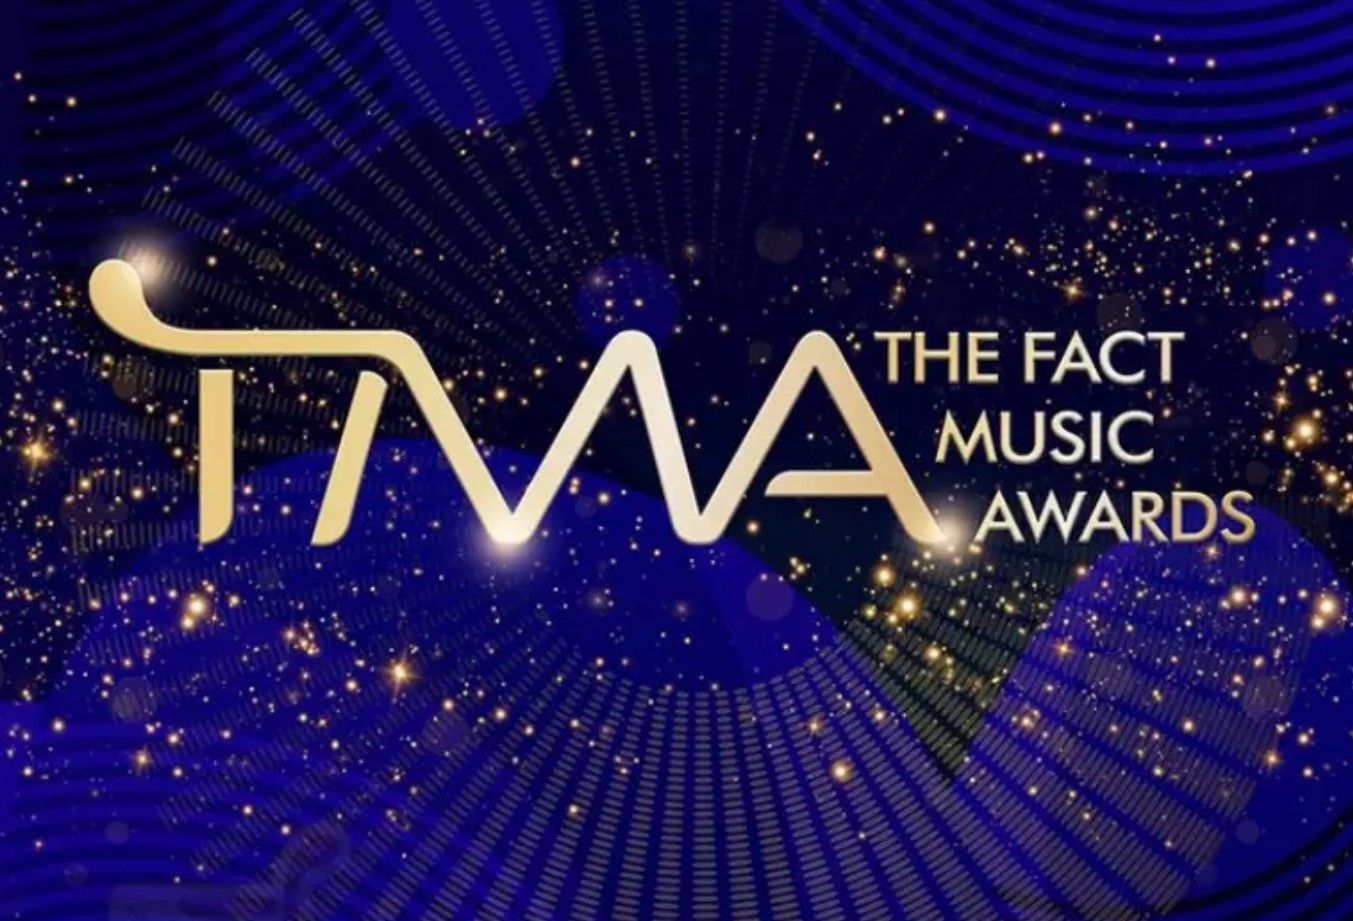 The 2024 edition of The Fact Music Awards is set to take place on September 8 at the Kyocera Dome in Osaka, Japan